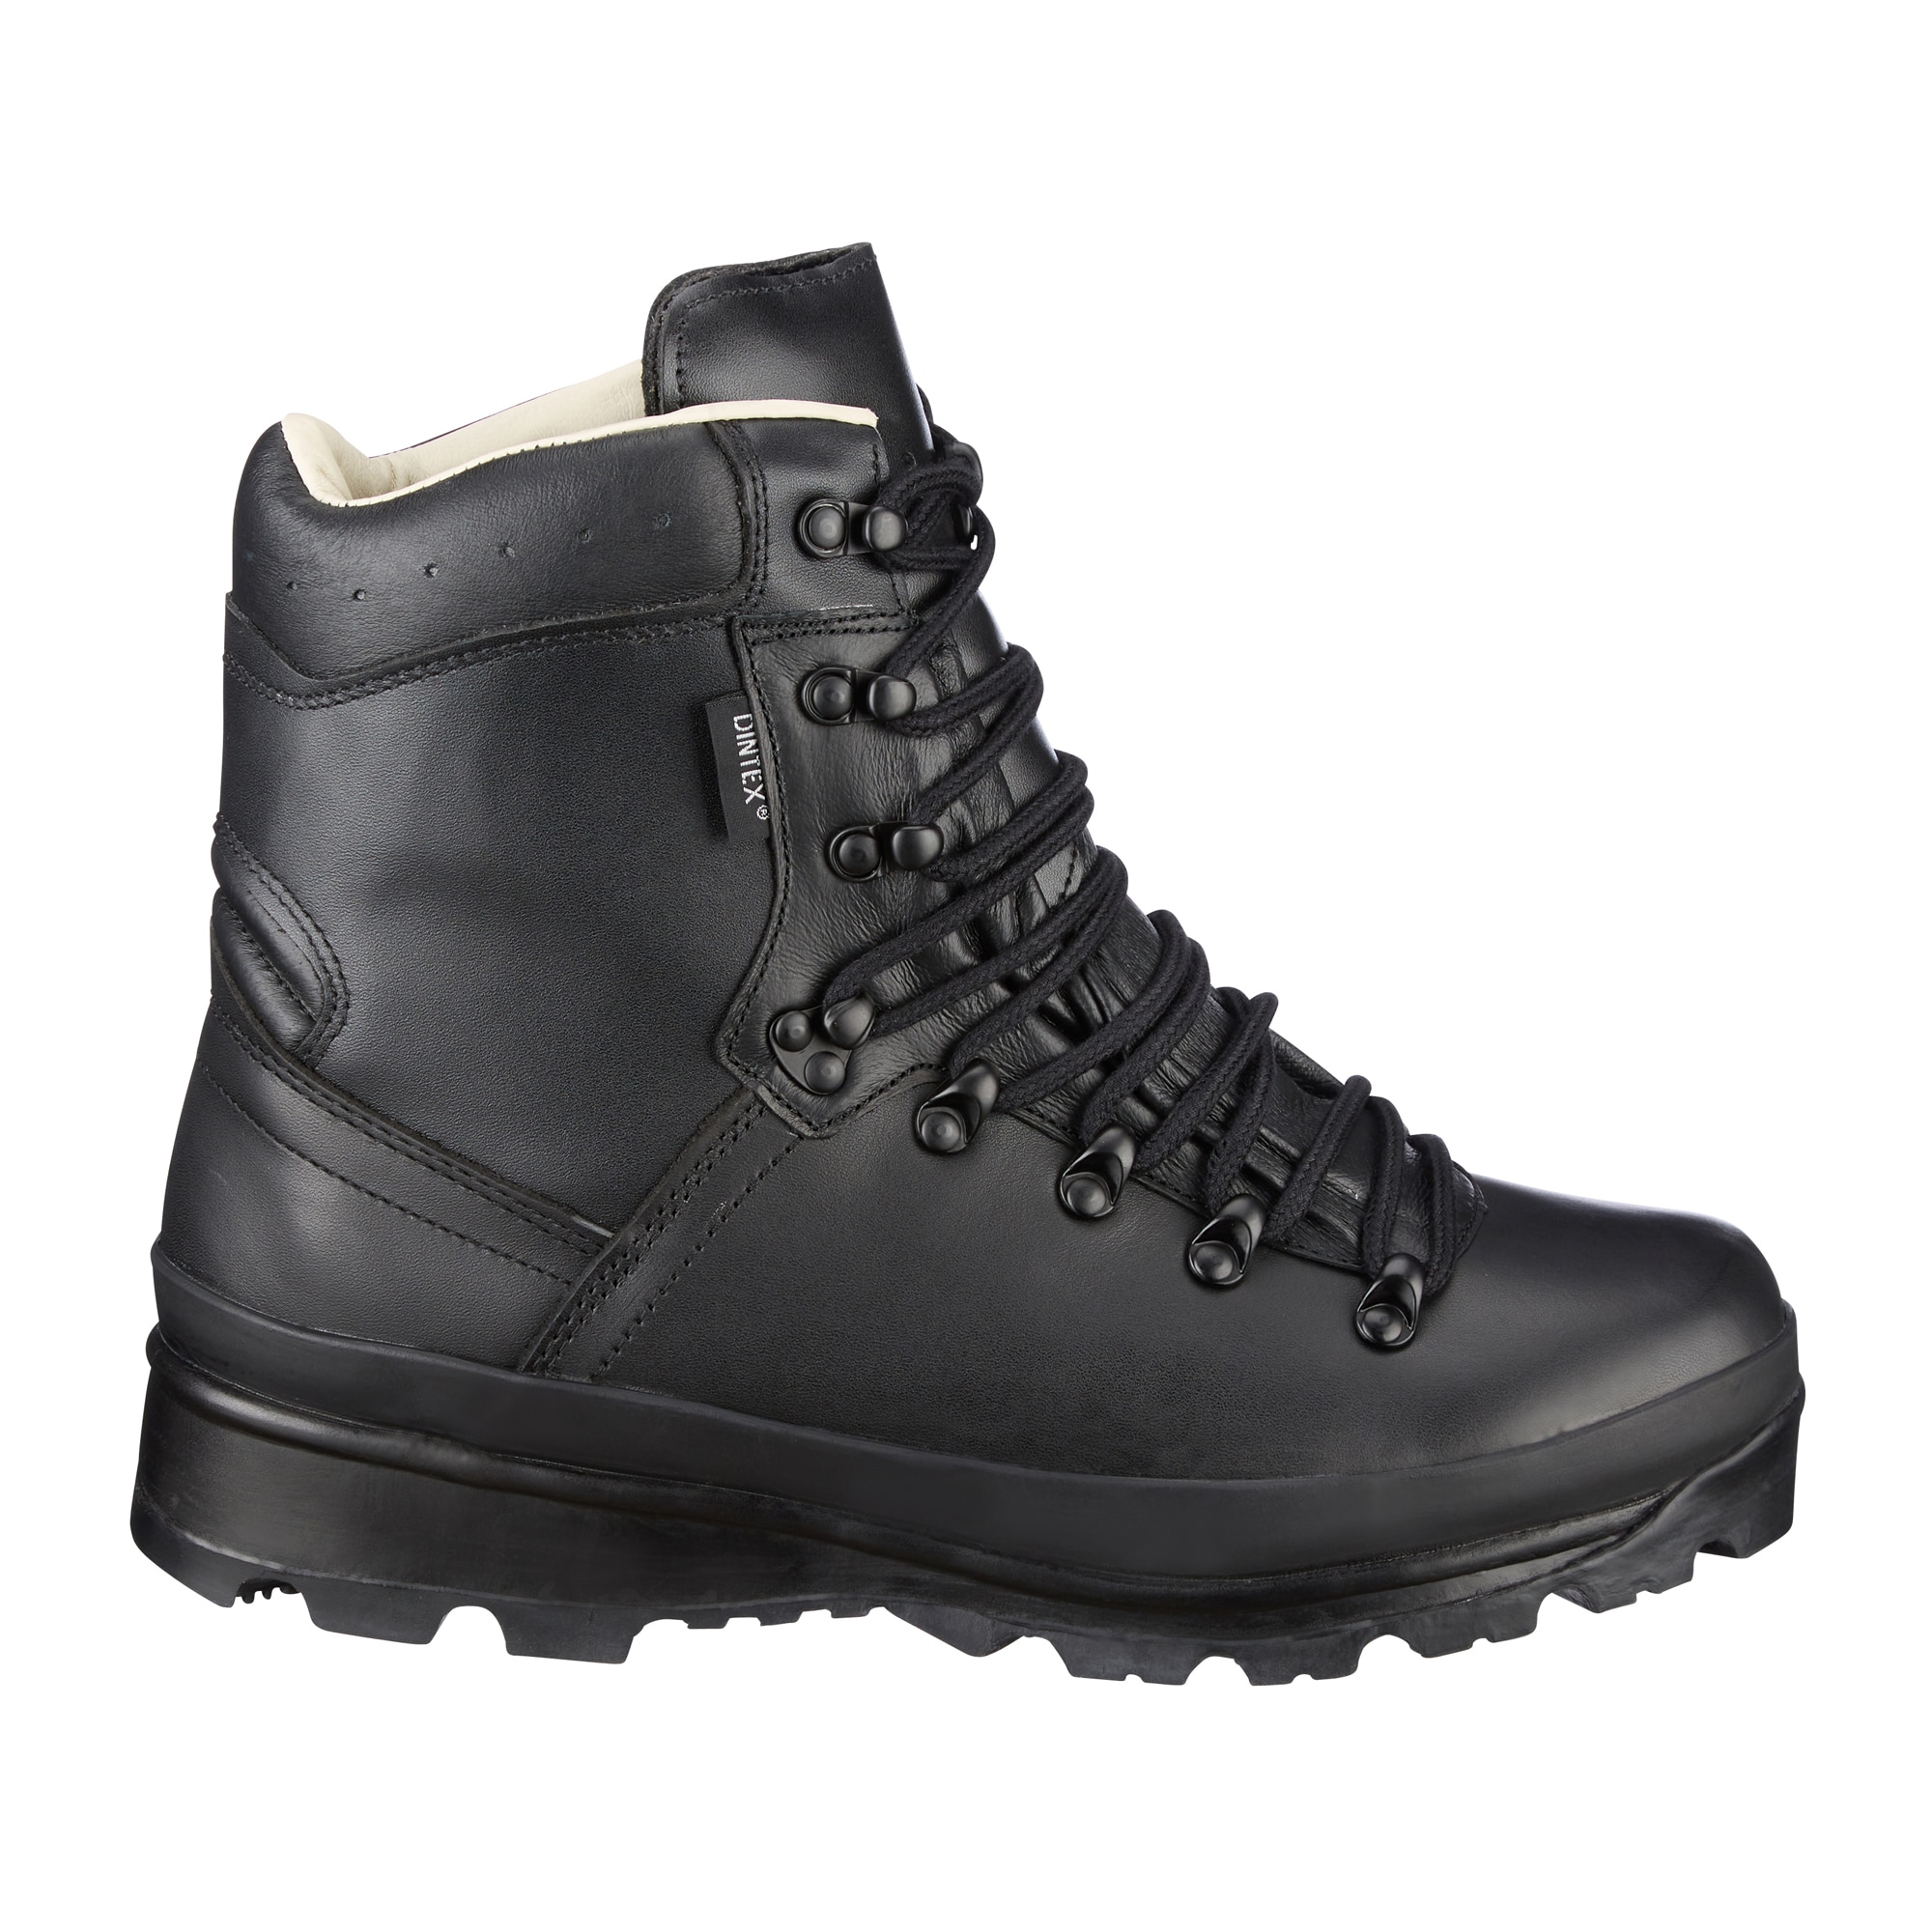 Purchase the German Army Style Mountain Boot by ASMC